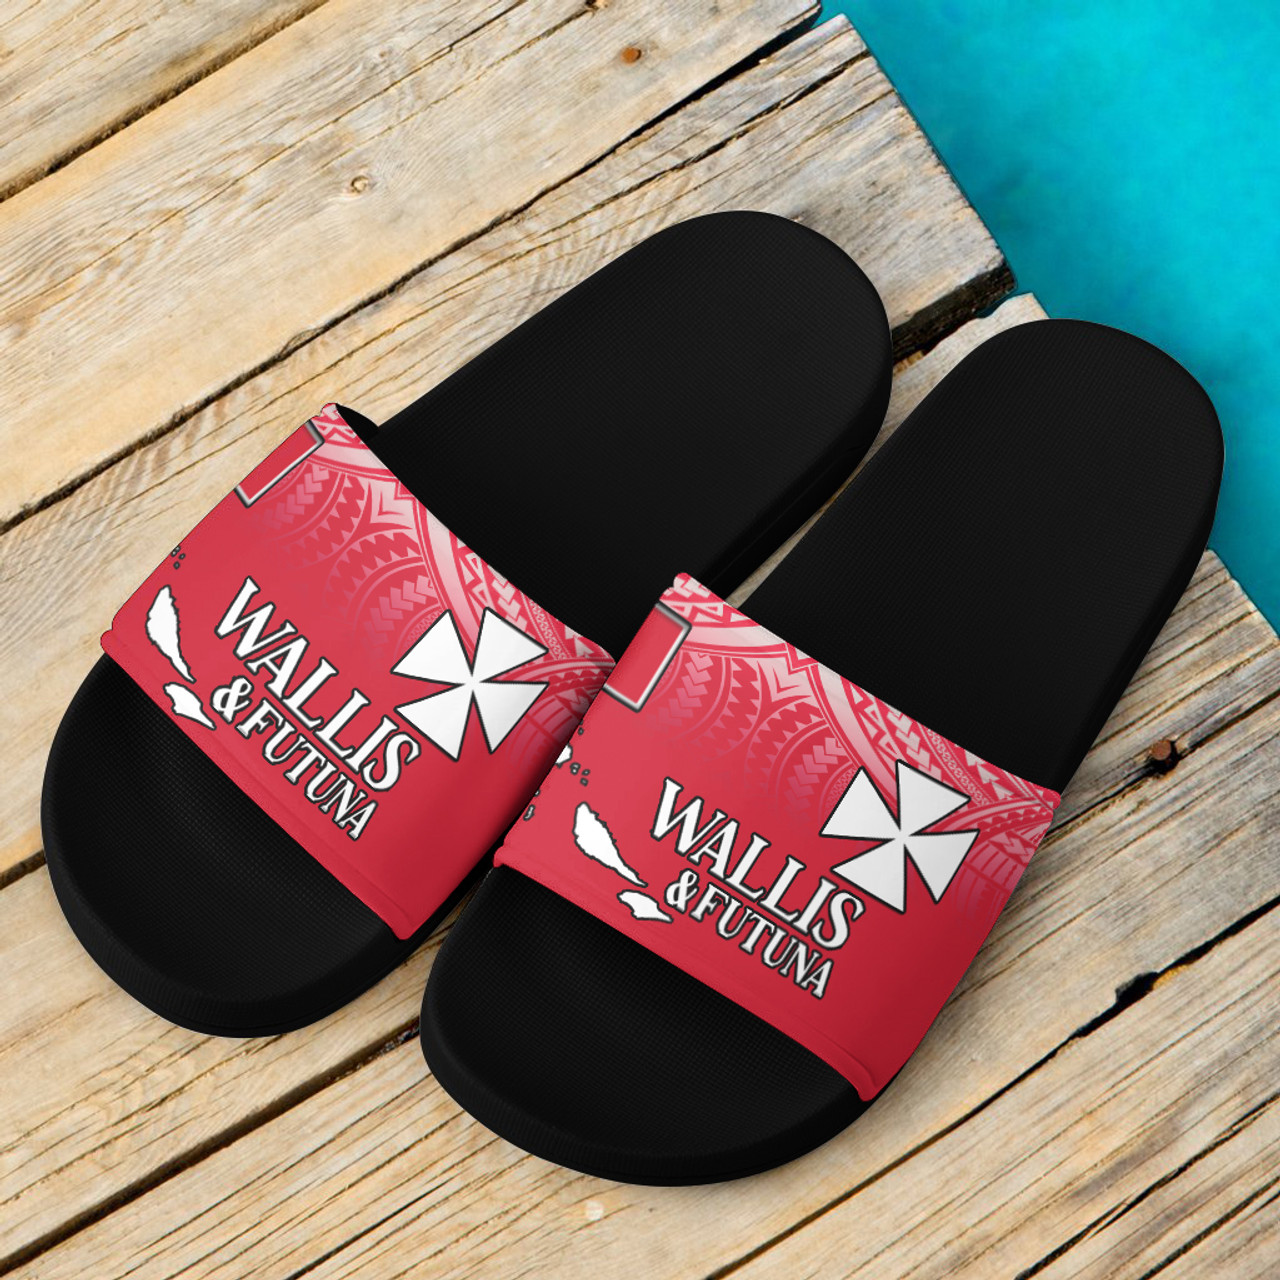 Wallis And Futuna Flag Color With Traditional Patterns Slide Sandals